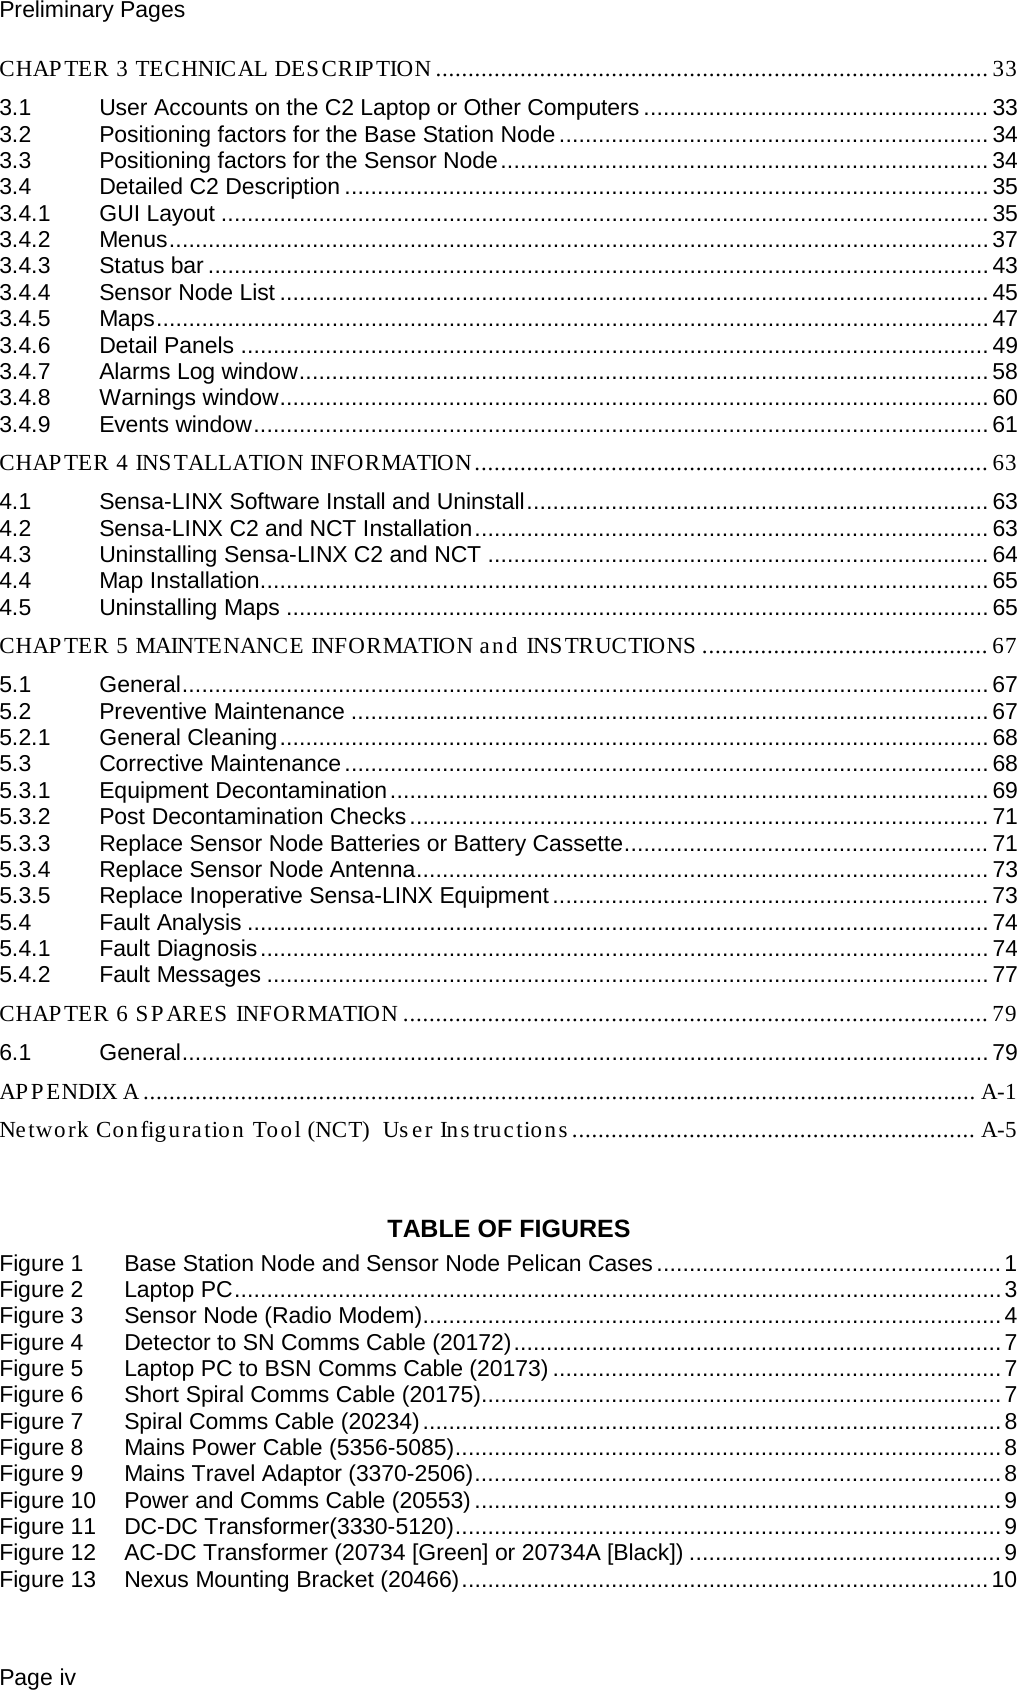 Preliminary Pages Page iv CHAPTER 3 TECHNICAL DESCRIPTION ..................................................................................... 33 3.1 User Accounts on the C2 Laptop or Other Computers ..................................................... 33 3.2 Positioning factors for the Base Station Node .................................................................. 34 3.3 Positioning factors for the Sensor Node ........................................................................... 34 3.4 Detailed C2 Description ................................................................................................... 35 3.4.1 GUI Layout ...................................................................................................................... 35 3.4.2 Menus .............................................................................................................................. 37 3.4.3 Status bar ........................................................................................................................ 43 3.4.4 Sensor Node List ............................................................................................................. 45 3.4.5 Maps ................................................................................................................................ 47 3.4.6 Detail Panels ................................................................................................................... 49 3.4.7 Alarms Log window .......................................................................................................... 58 3.4.8 Warnings window ............................................................................................................. 60 3.4.9 Events window ................................................................................................................. 61 CHAP TER 4 INS TALLATION INFORMATION ............................................................................... 63 4.1 Sensa-LINX Software Install and Uninstall ....................................................................... 63 4.2 Sensa-LINX C2 and NCT Installation ............................................................................... 63 4.3 Uninstalling Sensa-LINX C2 and NCT ............................................................................. 64 4.4 Map Installation ................................................................................................................ 65 4.5 Uninstalling Maps ............................................................................................................ 65 CHAP TER 5 MAINTENANCE INFORMATION an d INSTRUCTIONS  ............................................ 67 5.1 General ............................................................................................................................ 67 5.2 Preventive Maintenance .................................................................................................. 67 5.2.1 General Cleaning ............................................................................................................. 68 5.3 Corrective Maintenance ................................................................................................... 68 5.3.1 Equipment Decontamination ............................................................................................ 69 5.3.2 Post Decontamination Checks ......................................................................................... 71 5.3.3 Replace Sensor Node Batteries or Battery Cassette ........................................................ 71 5.3.4 Replace Sensor Node Antenna ........................................................................................ 73 5.3.5 Replace Inoperative Sensa-LINX Equipment ................................................................... 73 5.4 Fault Analysis .................................................................................................................. 74 5.4.1 Fault Diagnosis ................................................................................................................ 74 5.4.2 Fault Messages ............................................................................................................... 77 CHAPTER 6 SPARES INFORMATION .......................................................................................... 79 6.1 General ............................................................................................................................ 79 APPENDIX A ................................................................................................................................ A-1 Network Configuration Tool (NCT)  User Instructions .............................................................. A-5   TABLE OF FIGURES Figure 1 Base Station Node and Sensor Node Pelican Cases ..................................................... 1 Figure 2 Laptop PC ...................................................................................................................... 3 Figure 3 Sensor Node (Radio Modem) ......................................................................................... 4 Figure 4 Detector to SN Comms Cable (20172) ........................................................................... 7 Figure 5 Laptop PC to BSN Comms Cable (20173) ..................................................................... 7 Figure 6 Short Spiral Comms Cable (20175)................................................................................ 7 Figure 7 Spiral Comms Cable (20234) ......................................................................................... 8 Figure 8 Mains Power Cable (5356-5085) .................................................................................... 8 Figure 9 Mains Travel Adaptor (3370-2506) ................................................................................. 8 Figure 10 Power and Comms Cable (20553) ................................................................................. 9 Figure 11 DC-DC Transformer(3330-5120) .................................................................................... 9 Figure 12 AC-DC Transformer (20734 [Green] or 20734A [Black]) ................................................ 9 Figure 13 Nexus Mounting Bracket (20466) ................................................................................. 10 